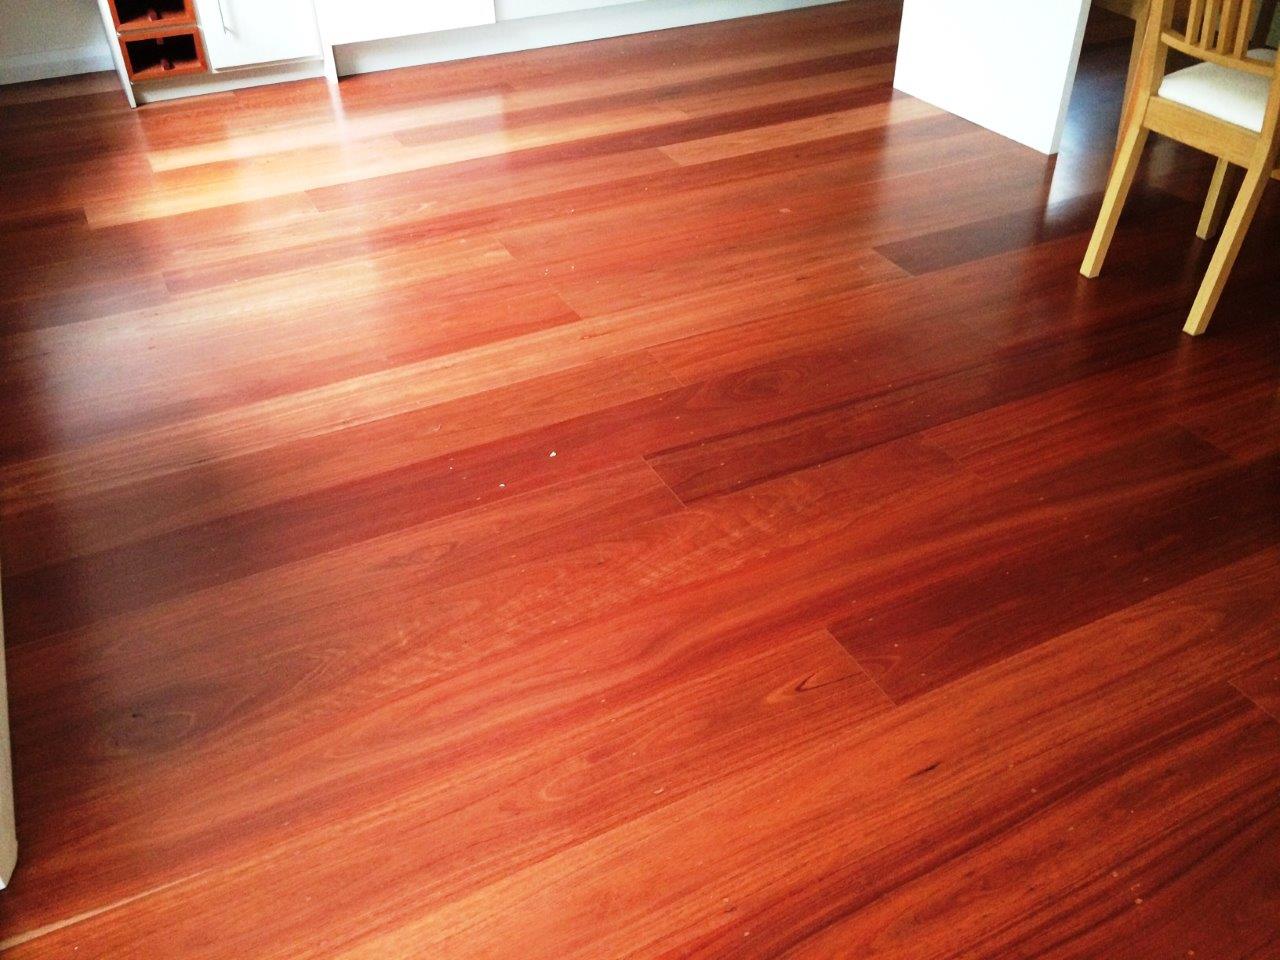 Snowy River Gum Timber Flooring - Abbey Timber